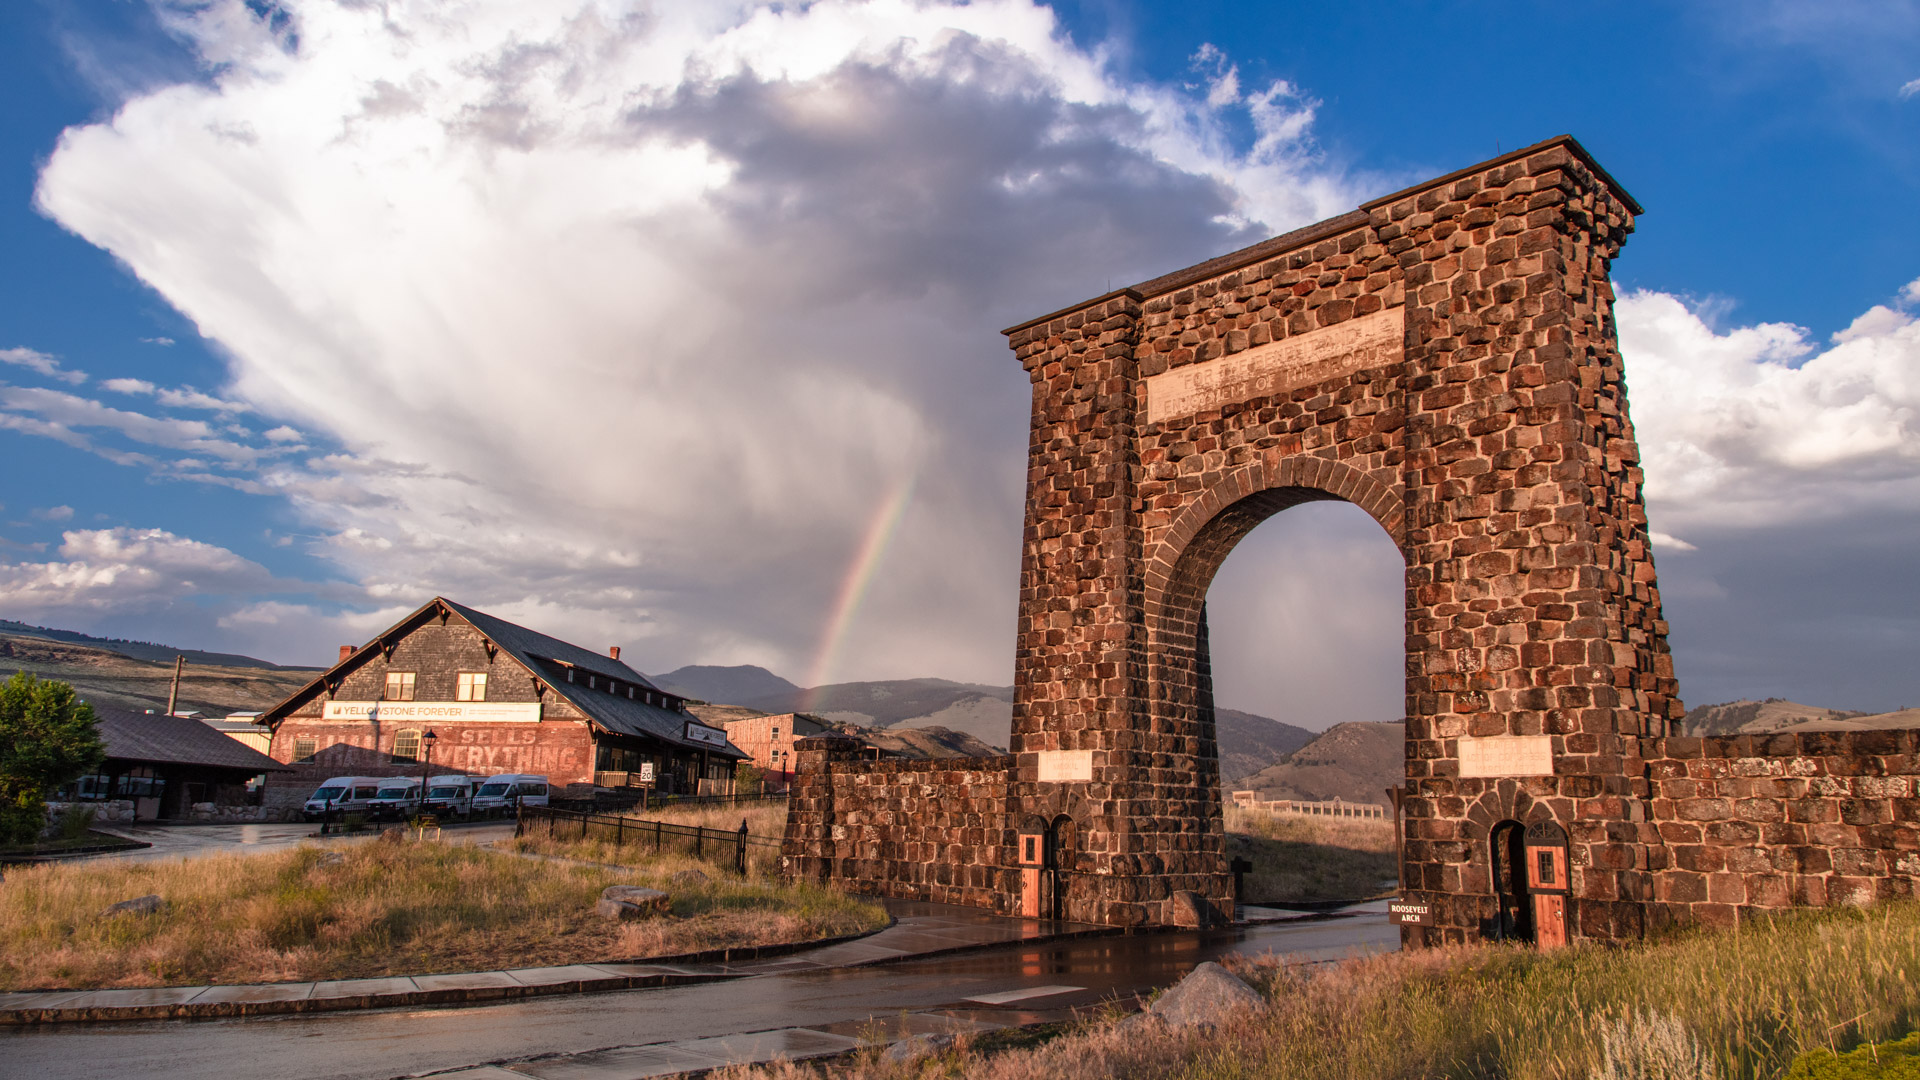 A rainbow appears between the iconic Roosevelt Arch and Yellowstone Forever store in Gardiner, MT.